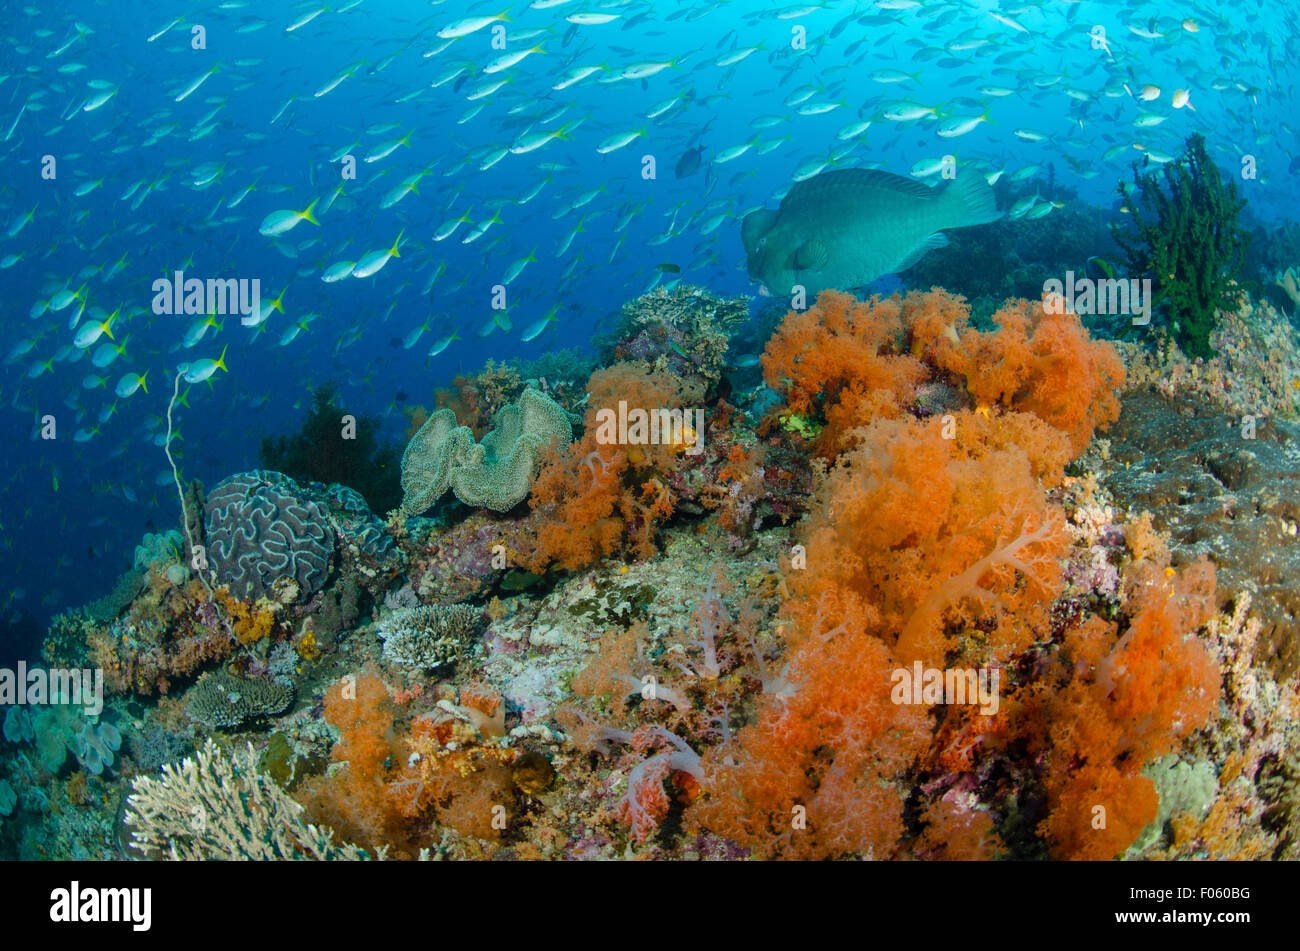 A lone Bumphead parrotfish, Bolbometopon muricatum, swims along an orange soft coral covered slope, Dendronephthya sp Stock Photo